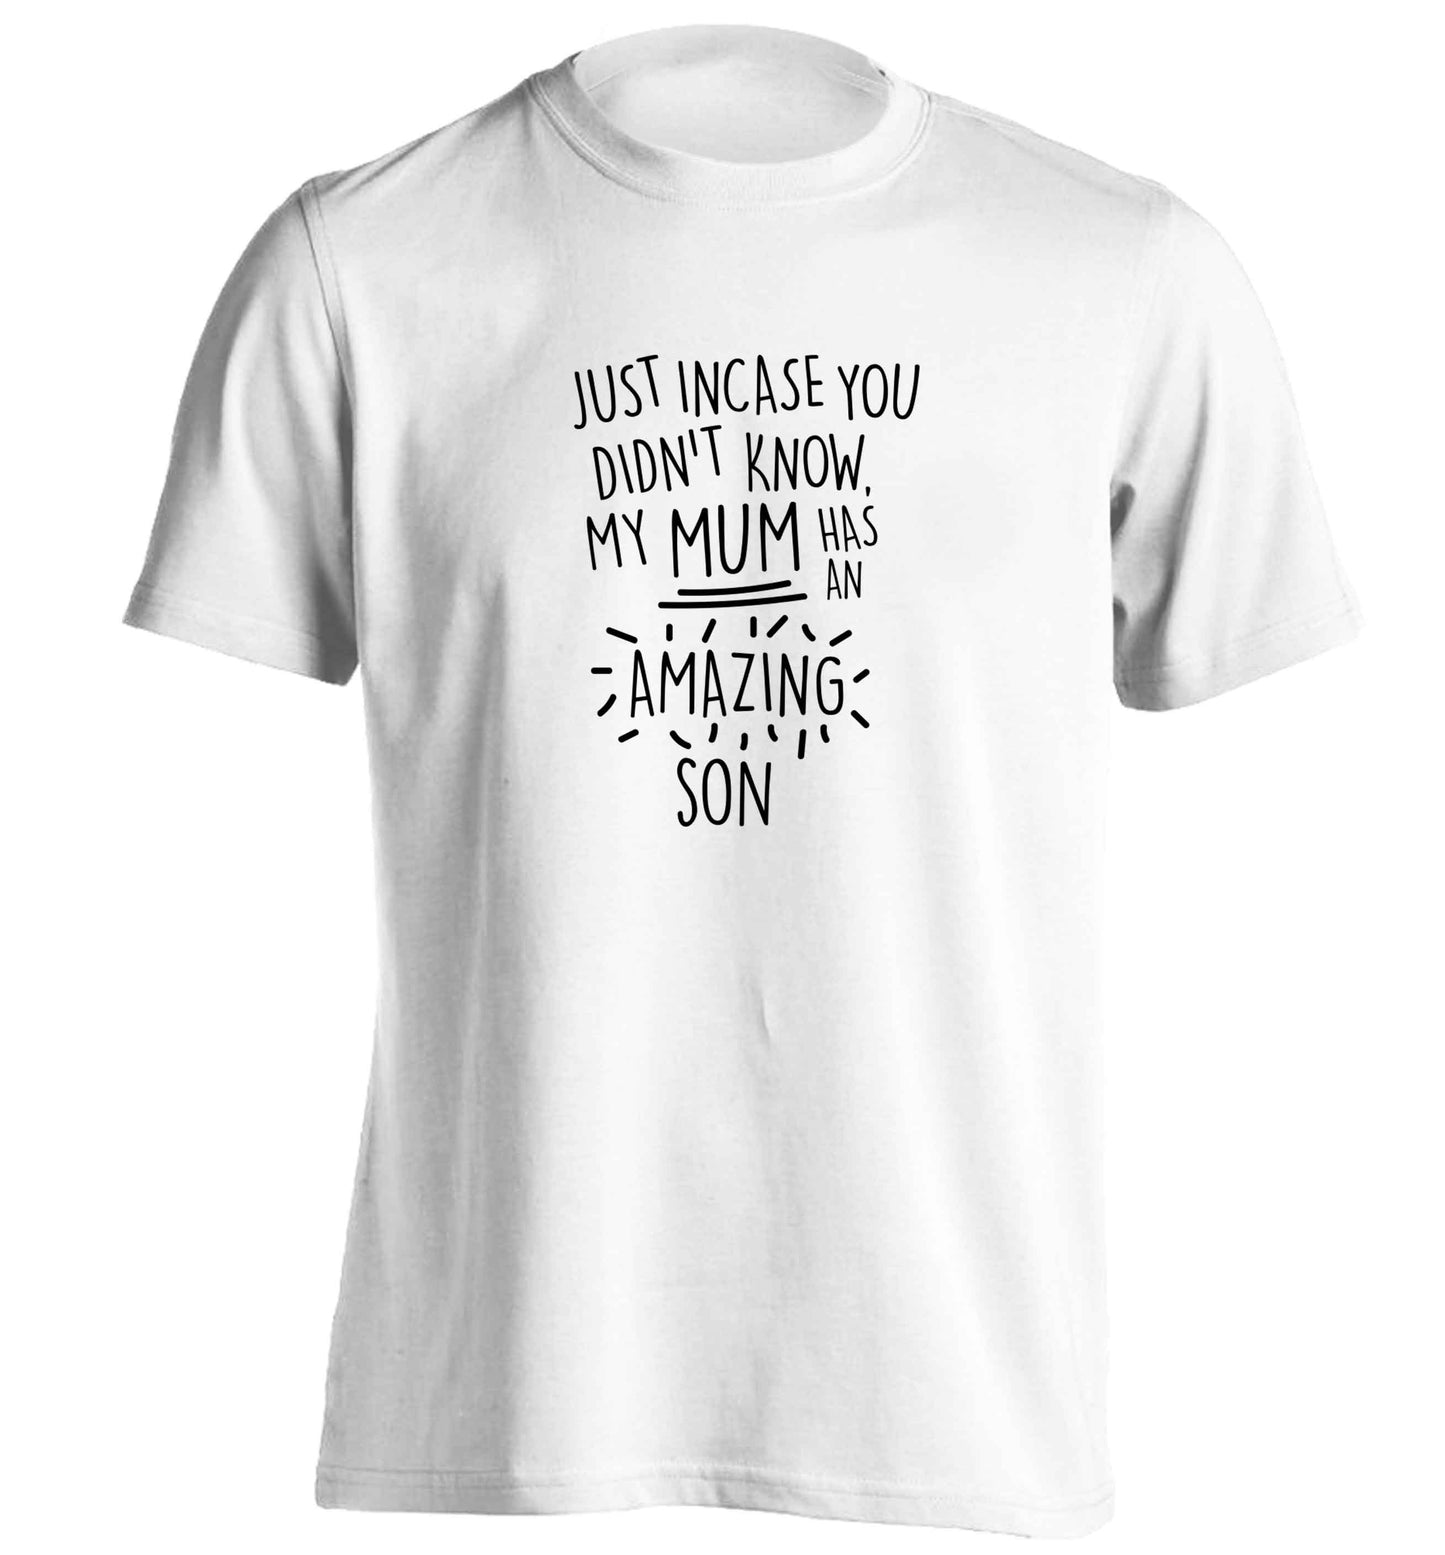 Just incase you didn't know my mum has an amazing son adults unisex white Tshirt 2XL